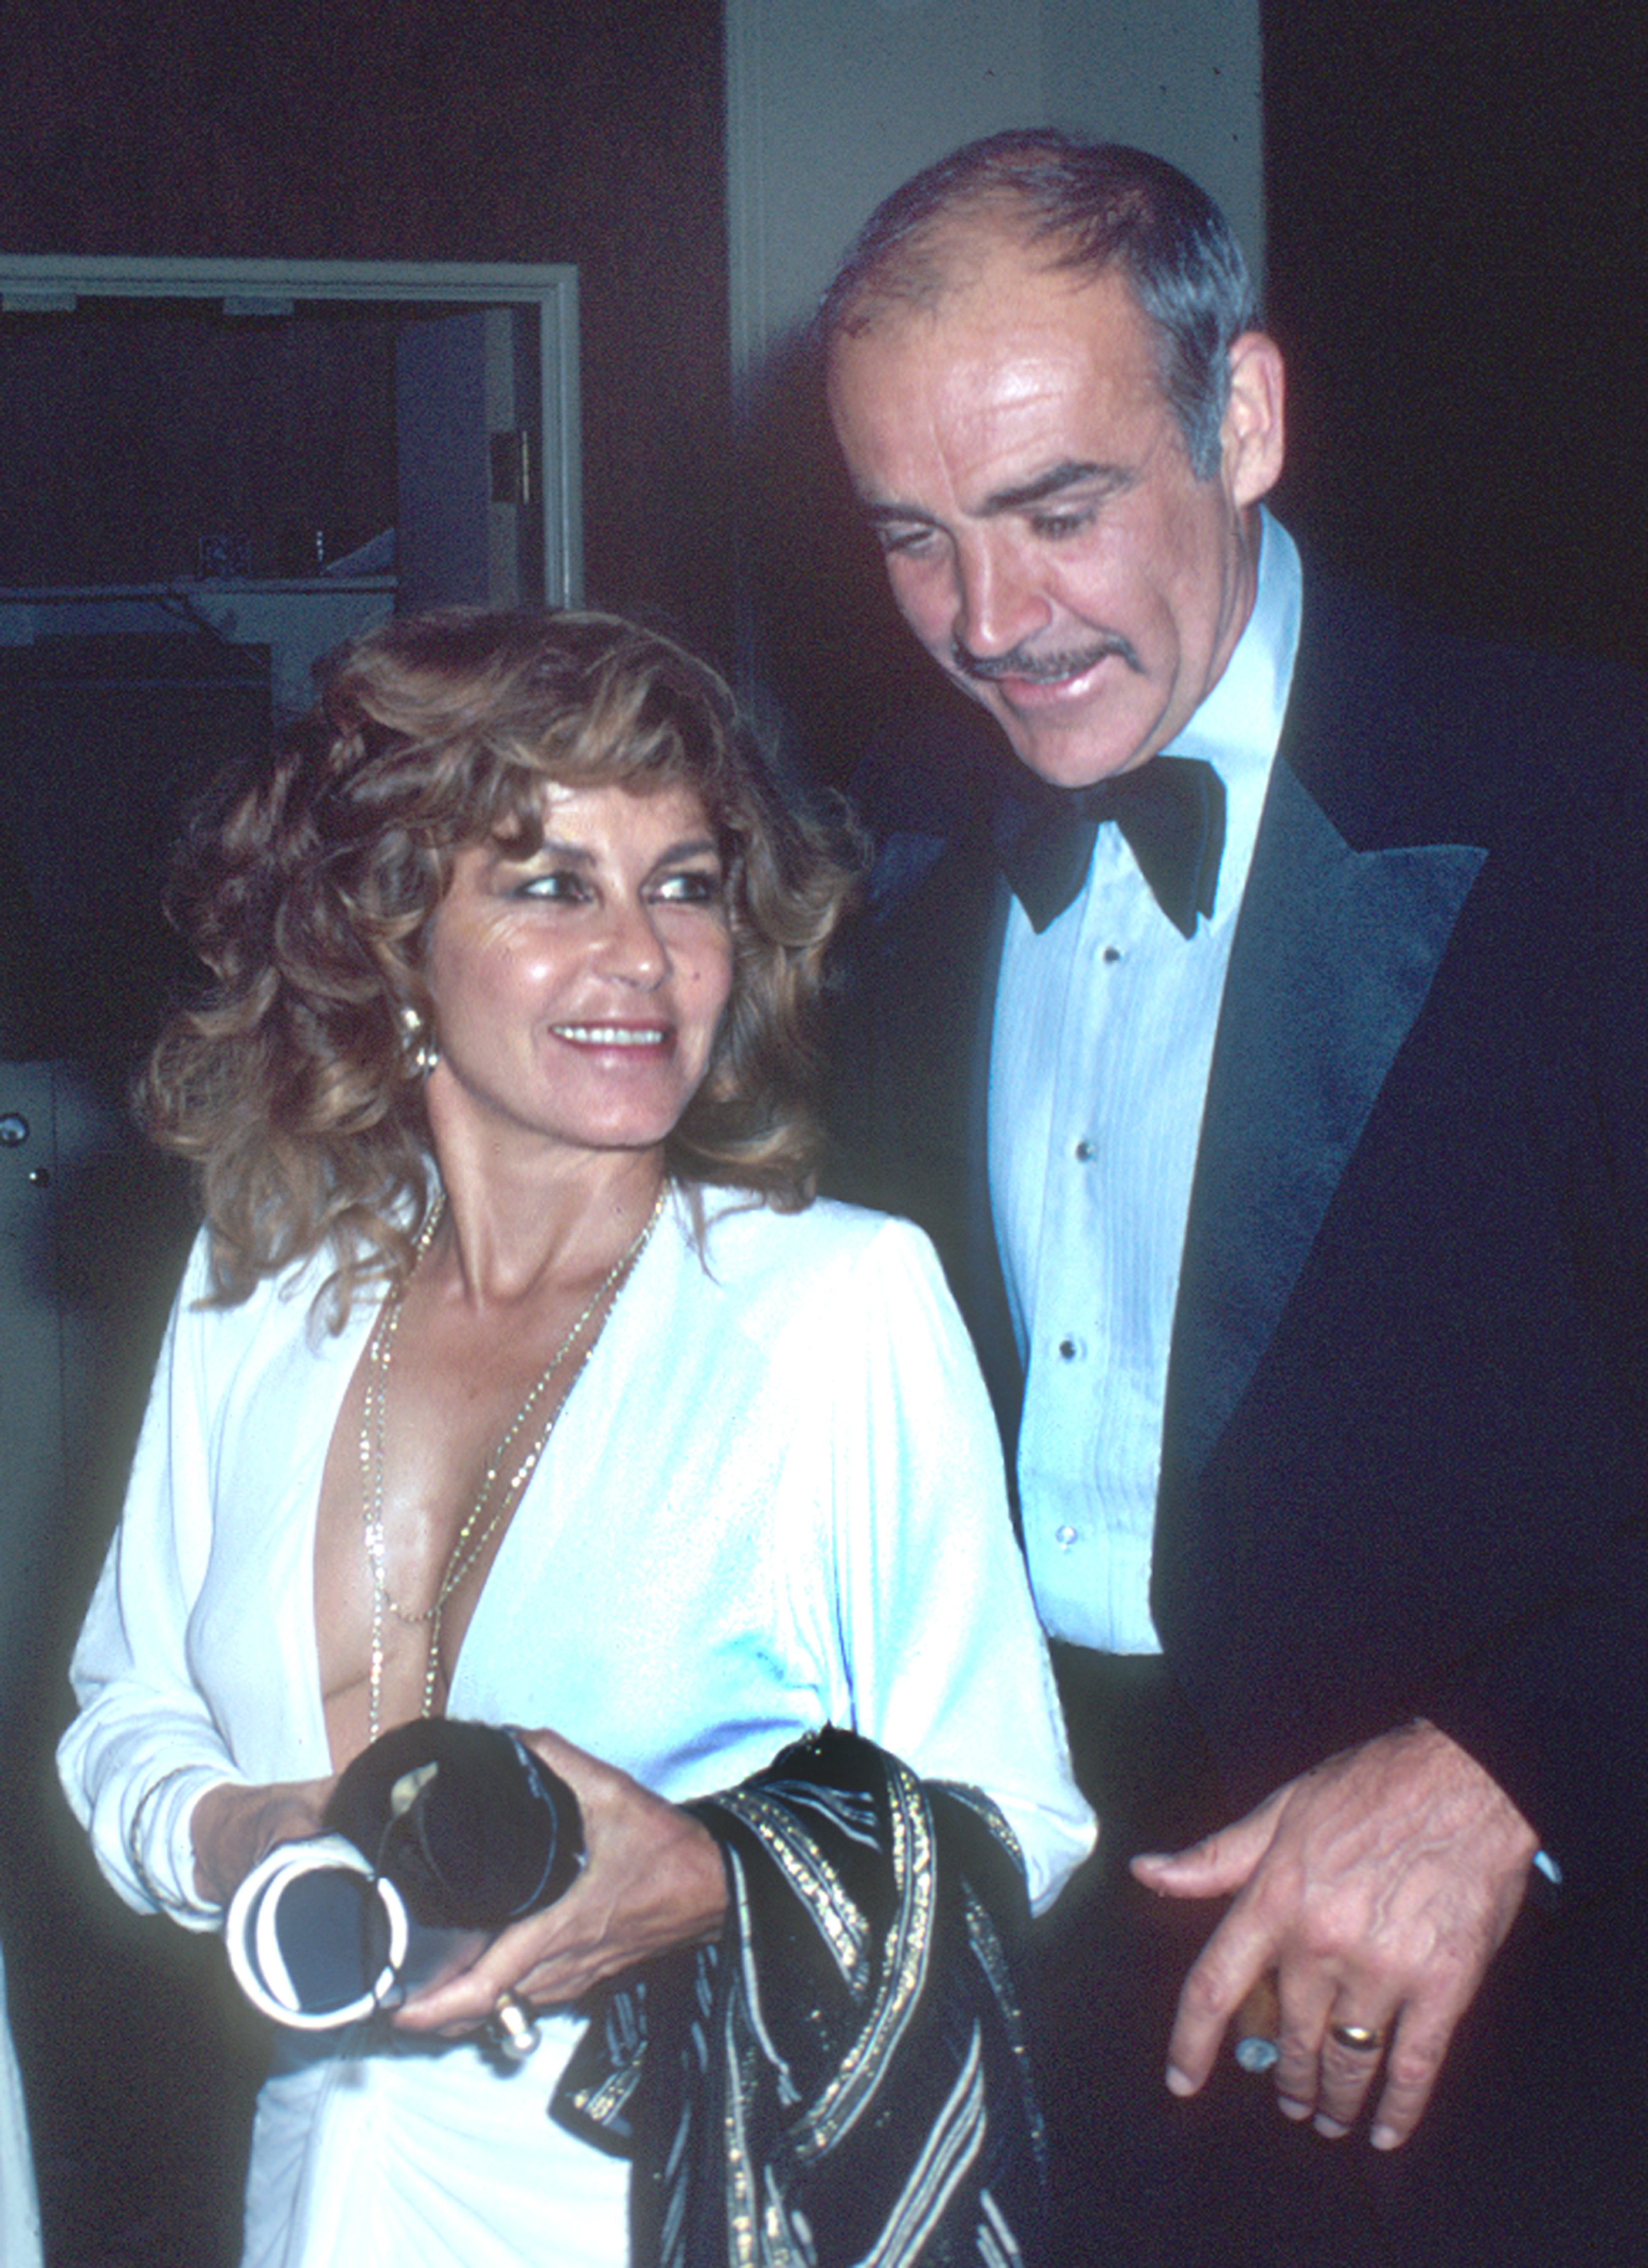 Moroccan-born painter Micheline Roquebrune and Sean Connery during an unidentified event in 1962, Hollywood, California. / Source: Getty Images